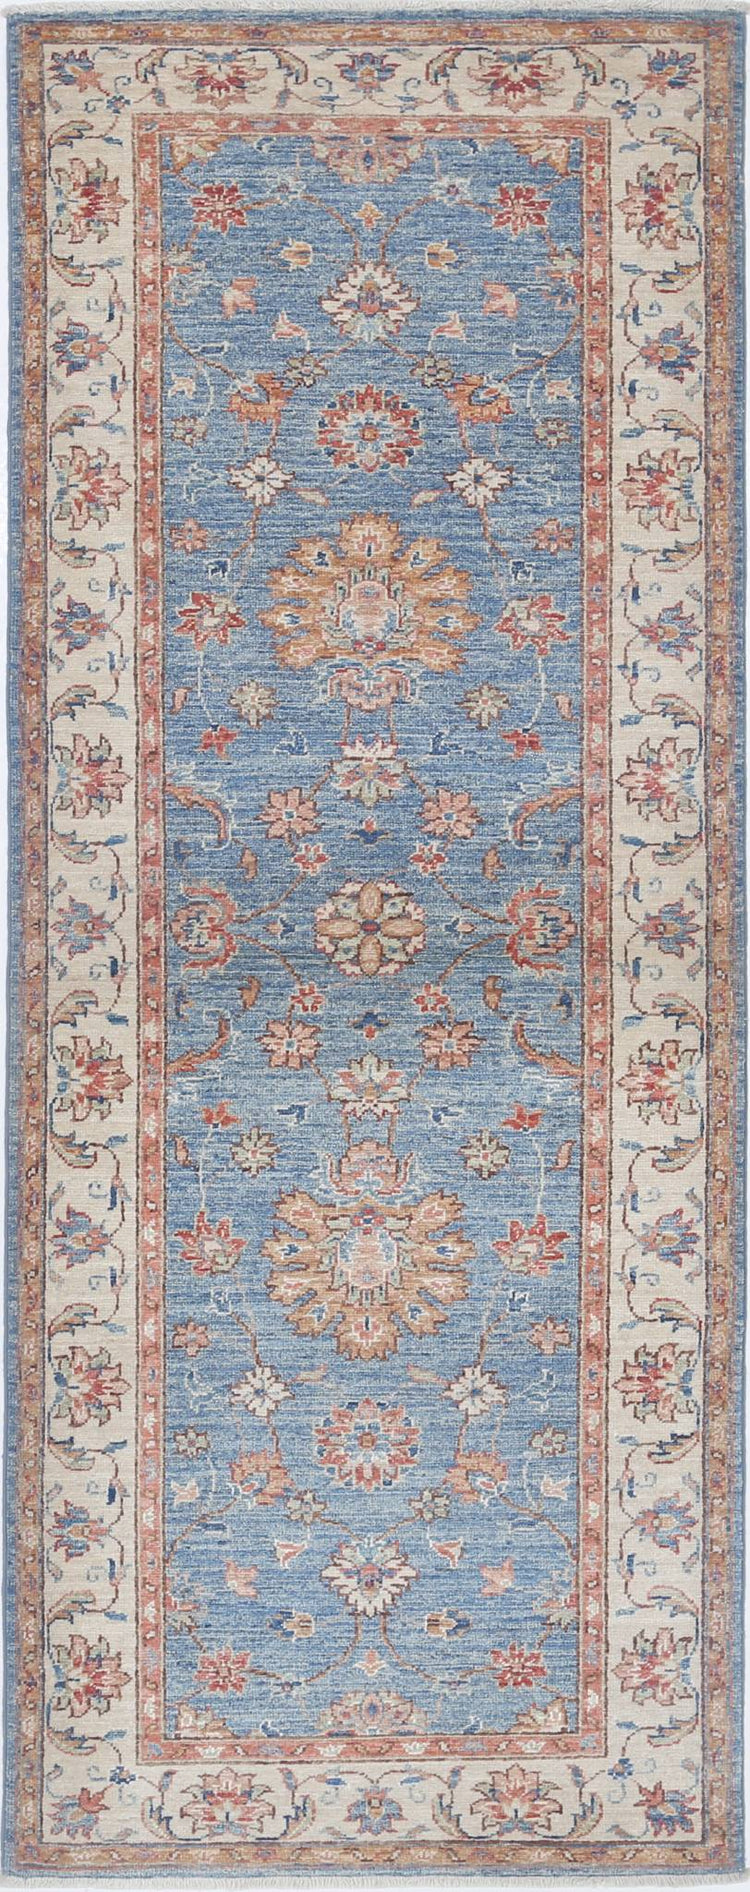 Traditional Hand Knotted Ziegler Farhan Wool Rug of Size 2'8'' X 6'10'' in Blue and Ivory Colors - Made in Afghanistan